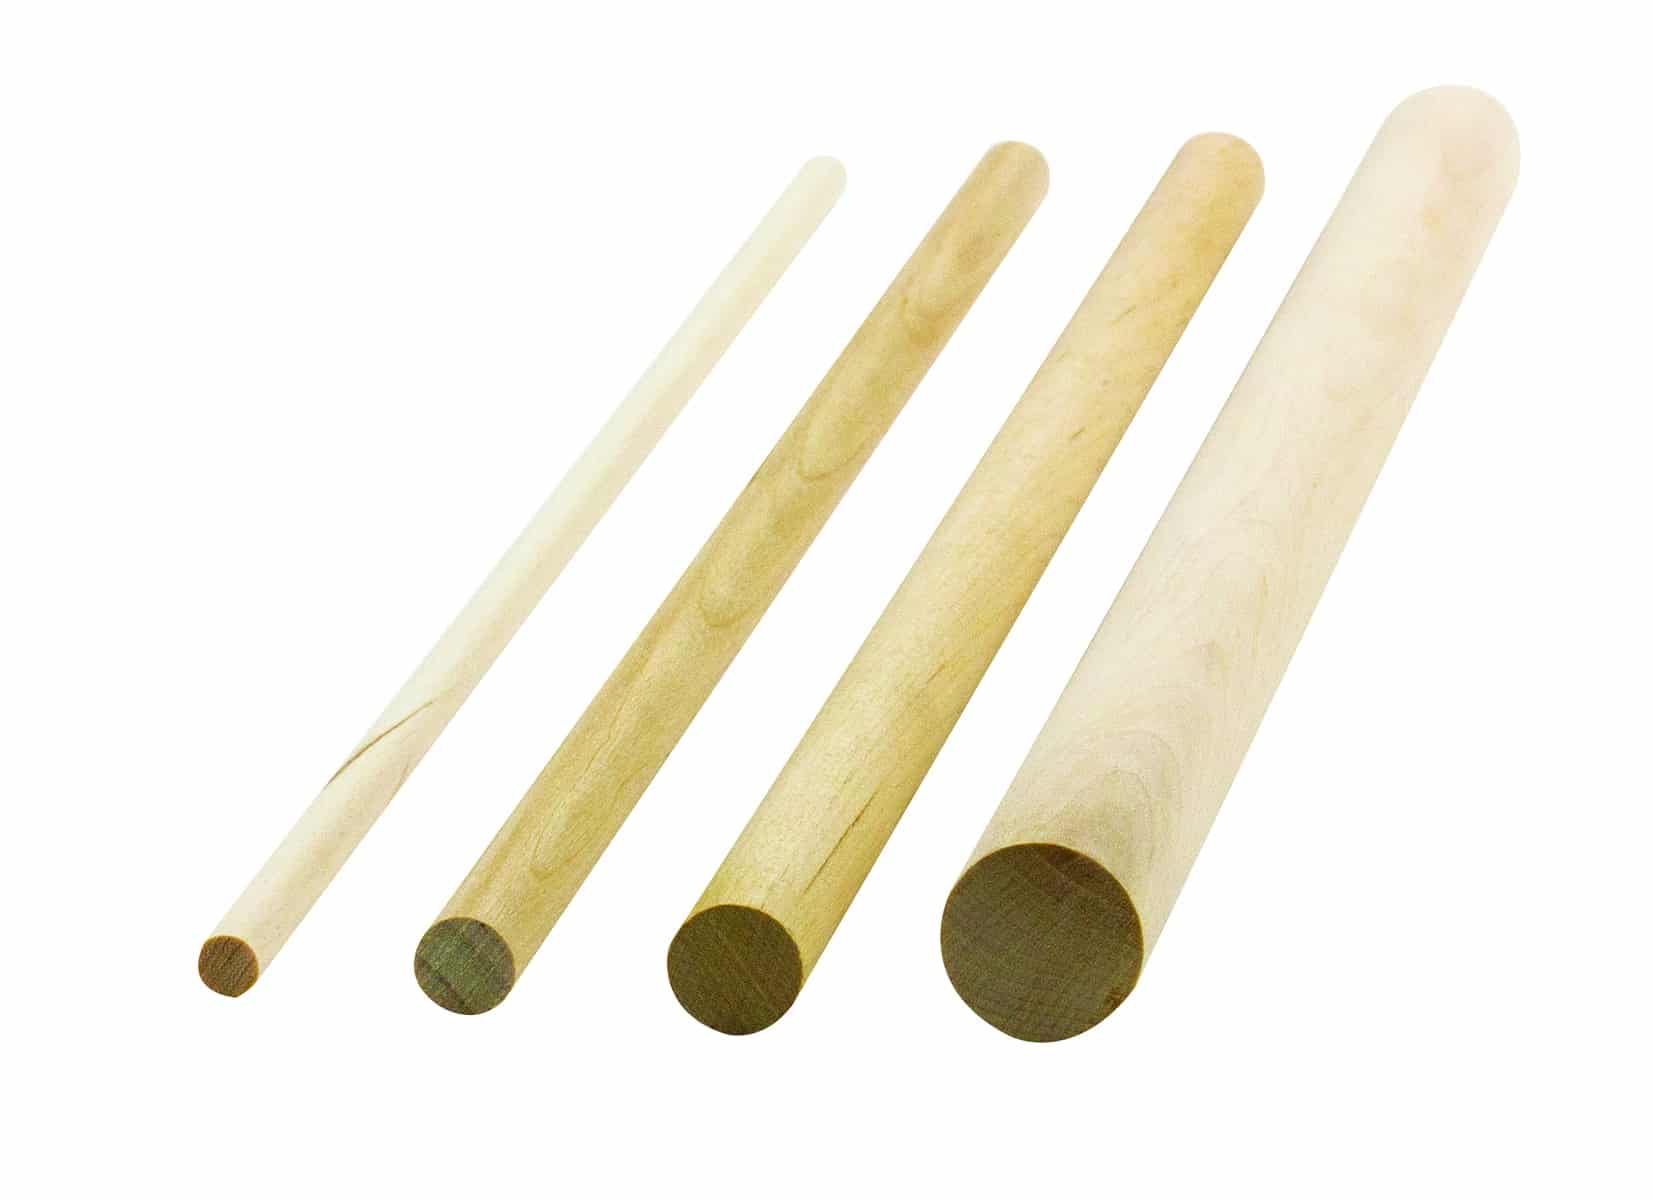 6 x 1/4 Inch Wood Dowel Rods Unfinished Hardwood Sticks for Crafts and –  WoodArtSupply